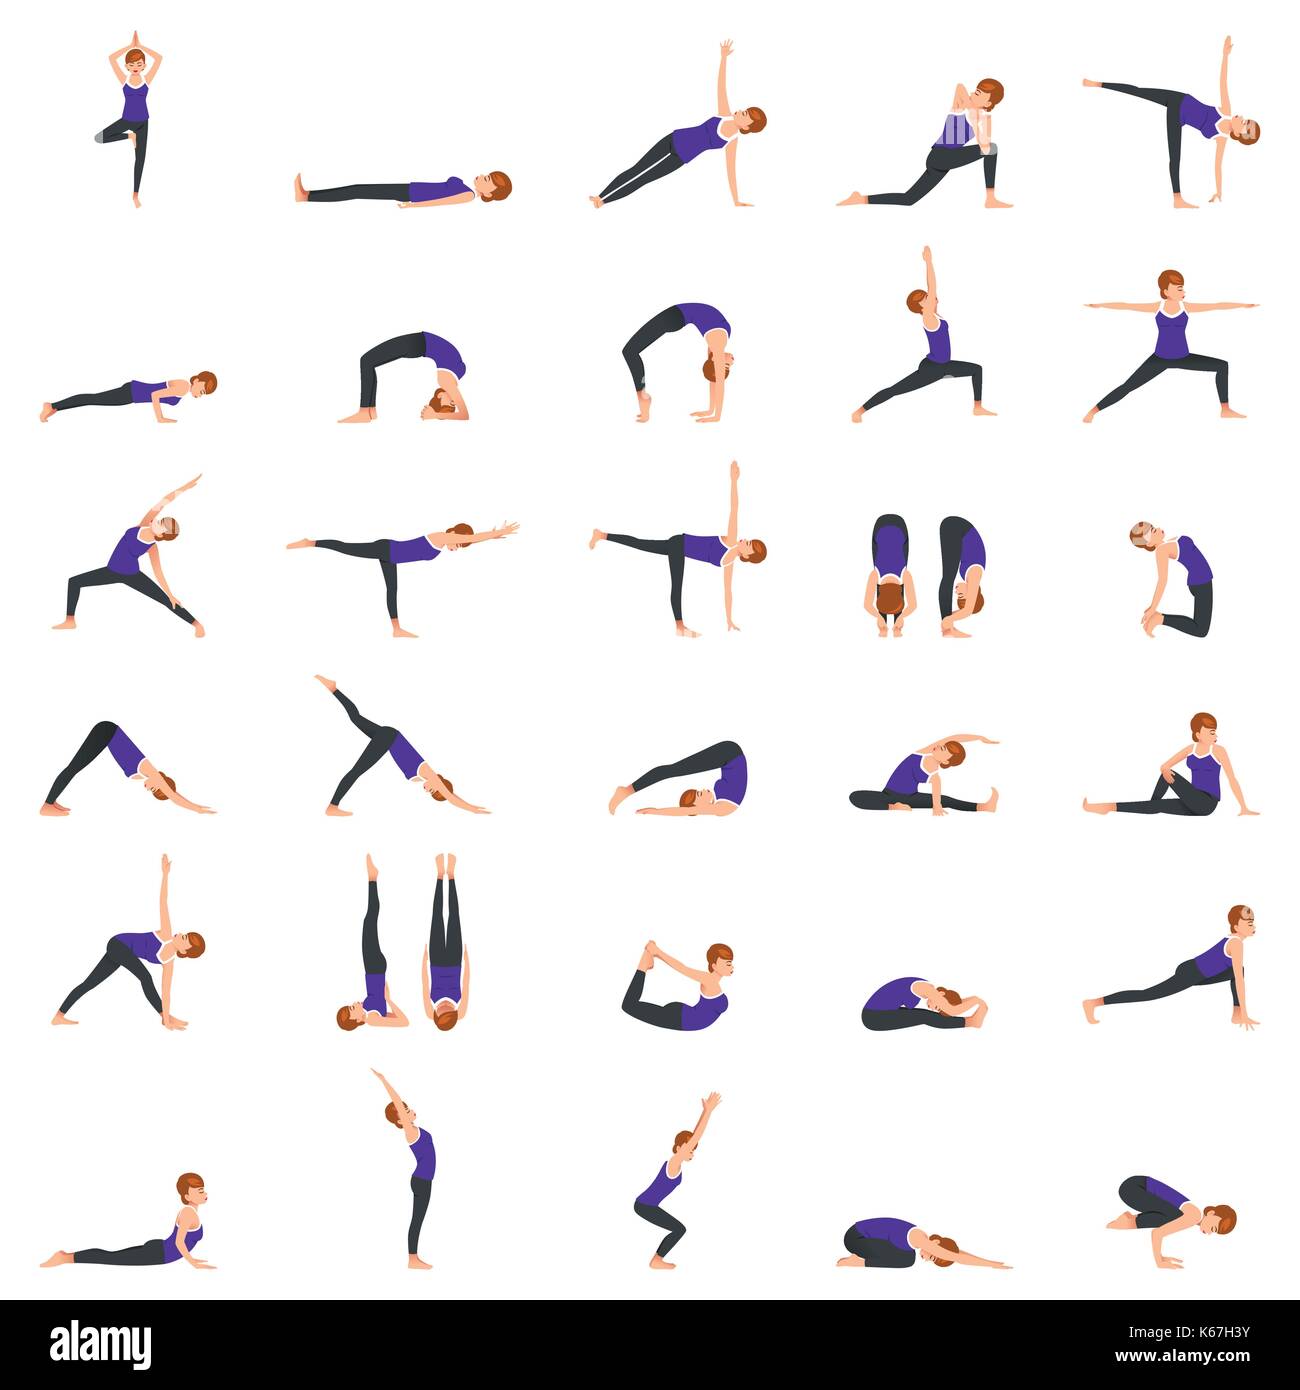 Yoga Poses for a Healthy Body